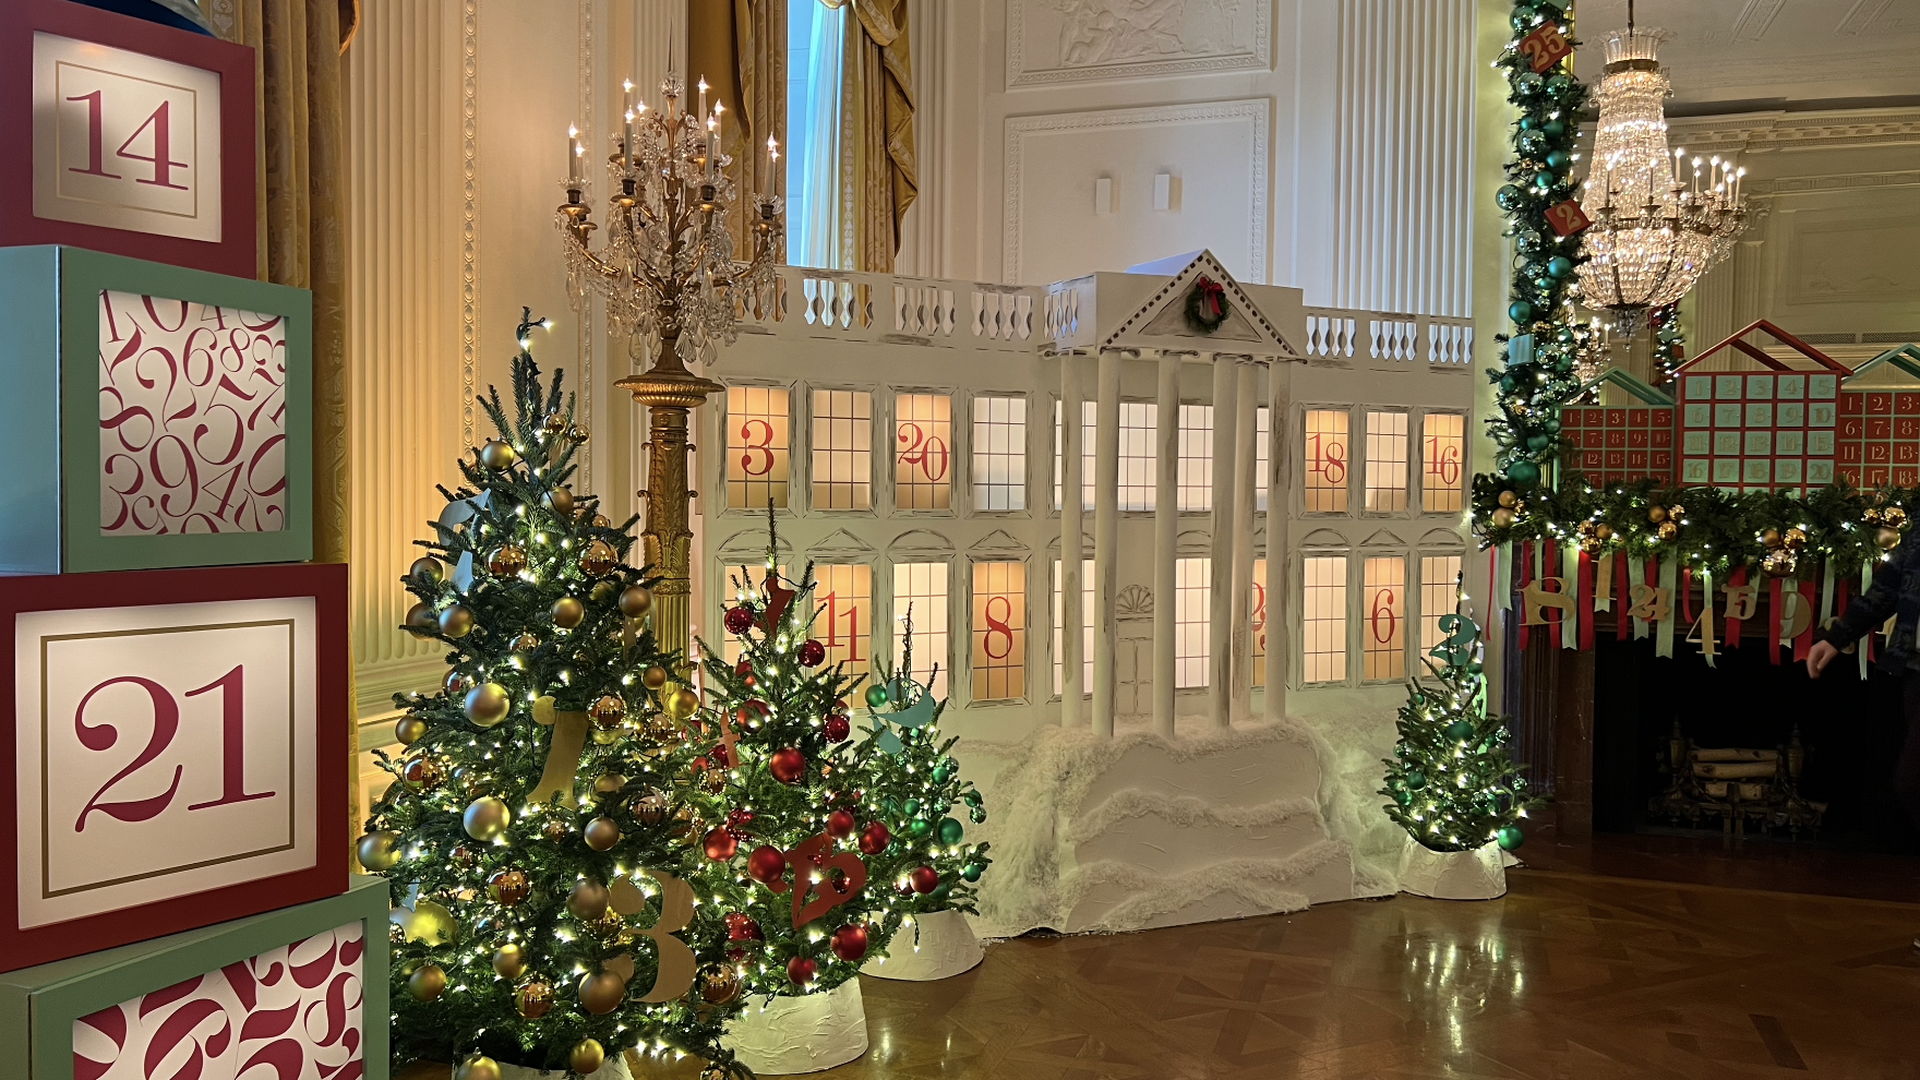 2022 White House the White House 2022 Gingerbread Christmas Ornament, White  House Ornament, Christmas Ornament, Christmas Gift 